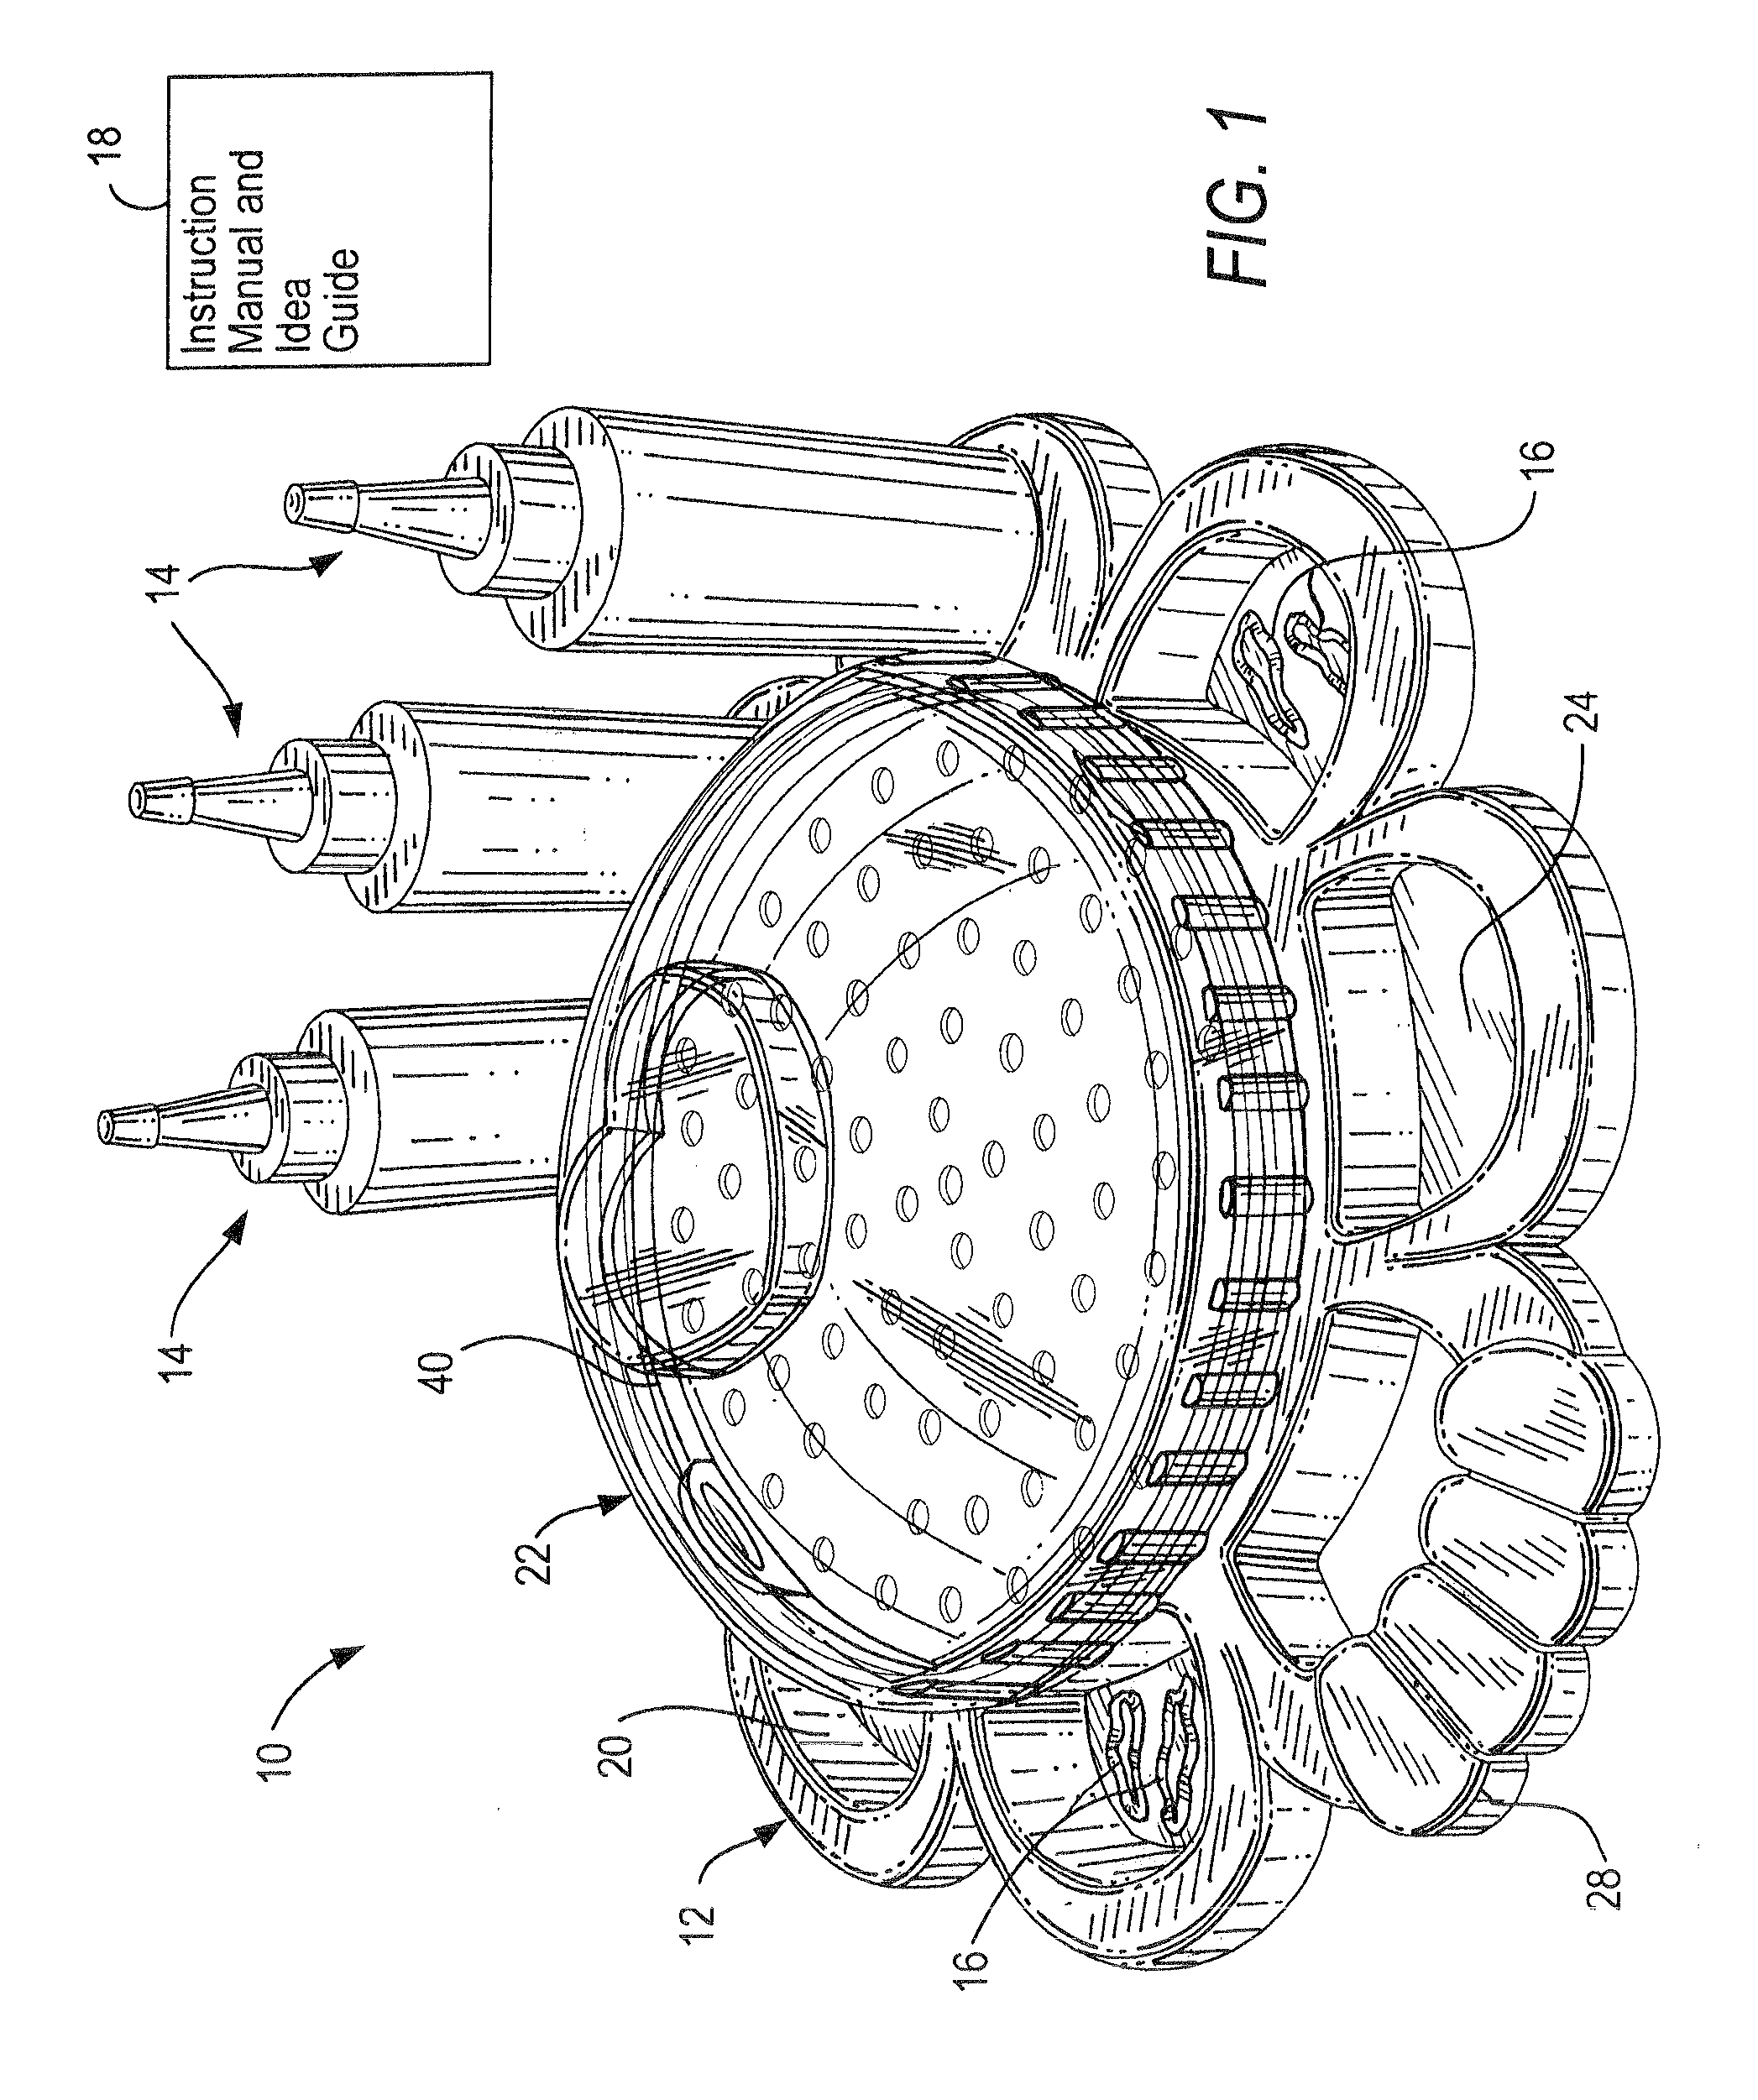 Kit and method for tie-dyeing and utensil therefor